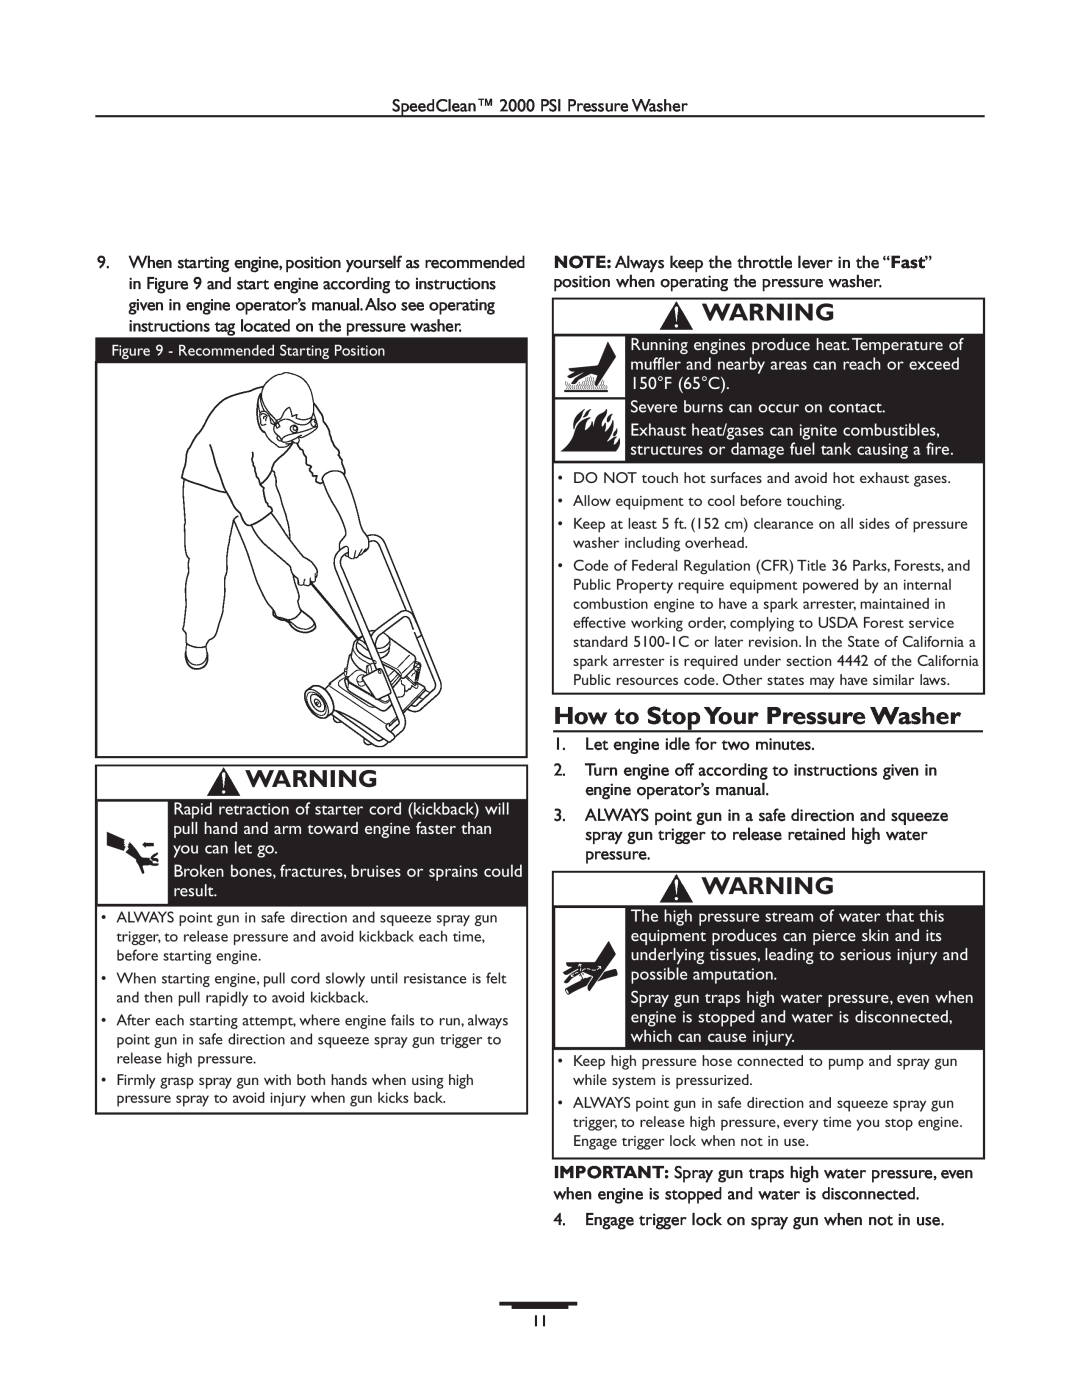 Briggs & Stratton 020238-0 operating instructions How to Stop Your Pressure Washer, SpeedClean 2000 PSI Pressure Washer 